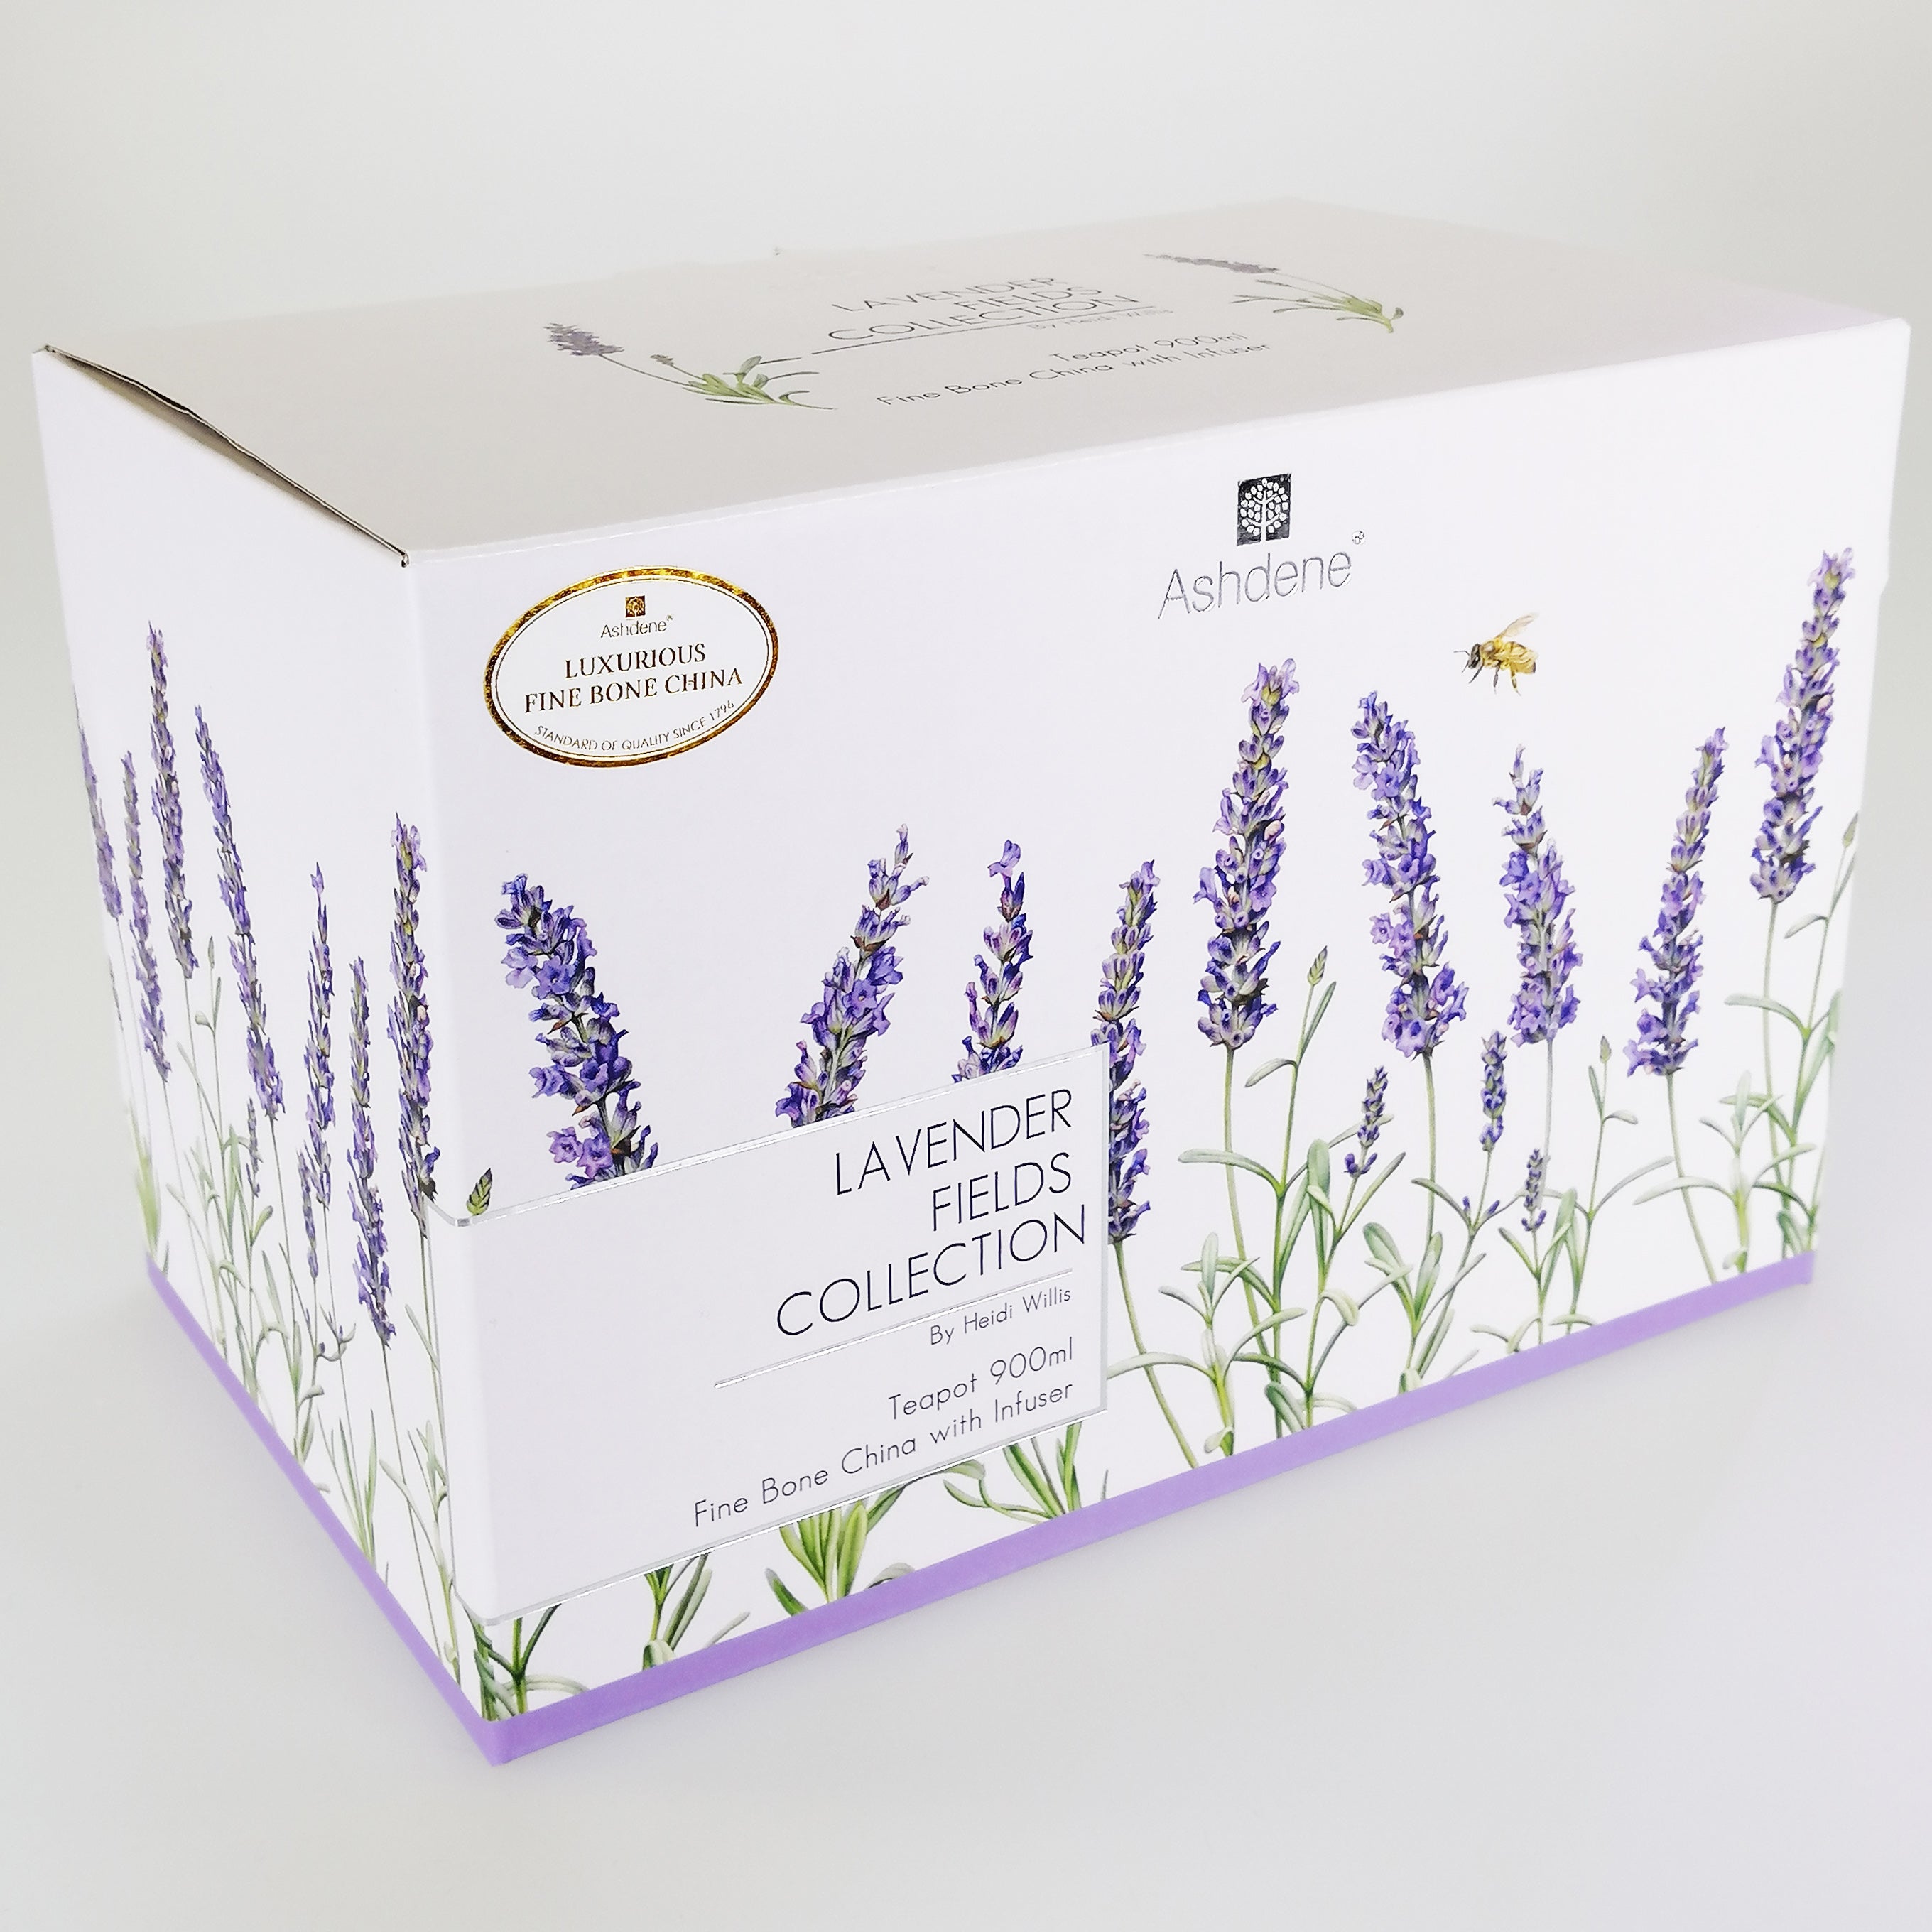 Lavender Fields - Teapot - 900ml with Infuser